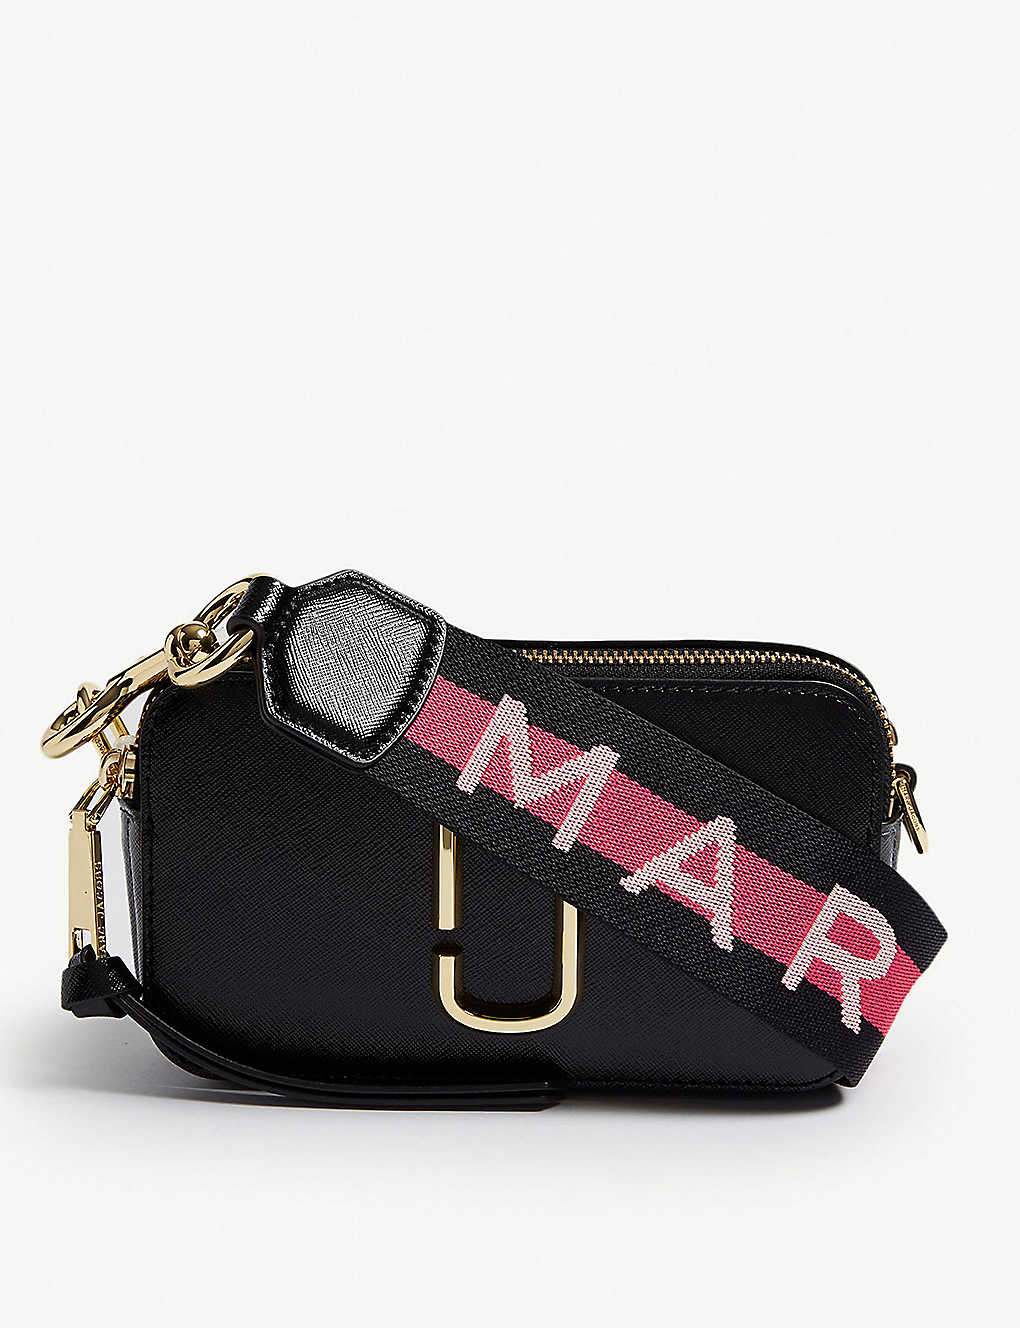 MARC JACOBS - Snapshot leather cross-body bag | www.bagssaleusa.com/product-category/classic-bags/